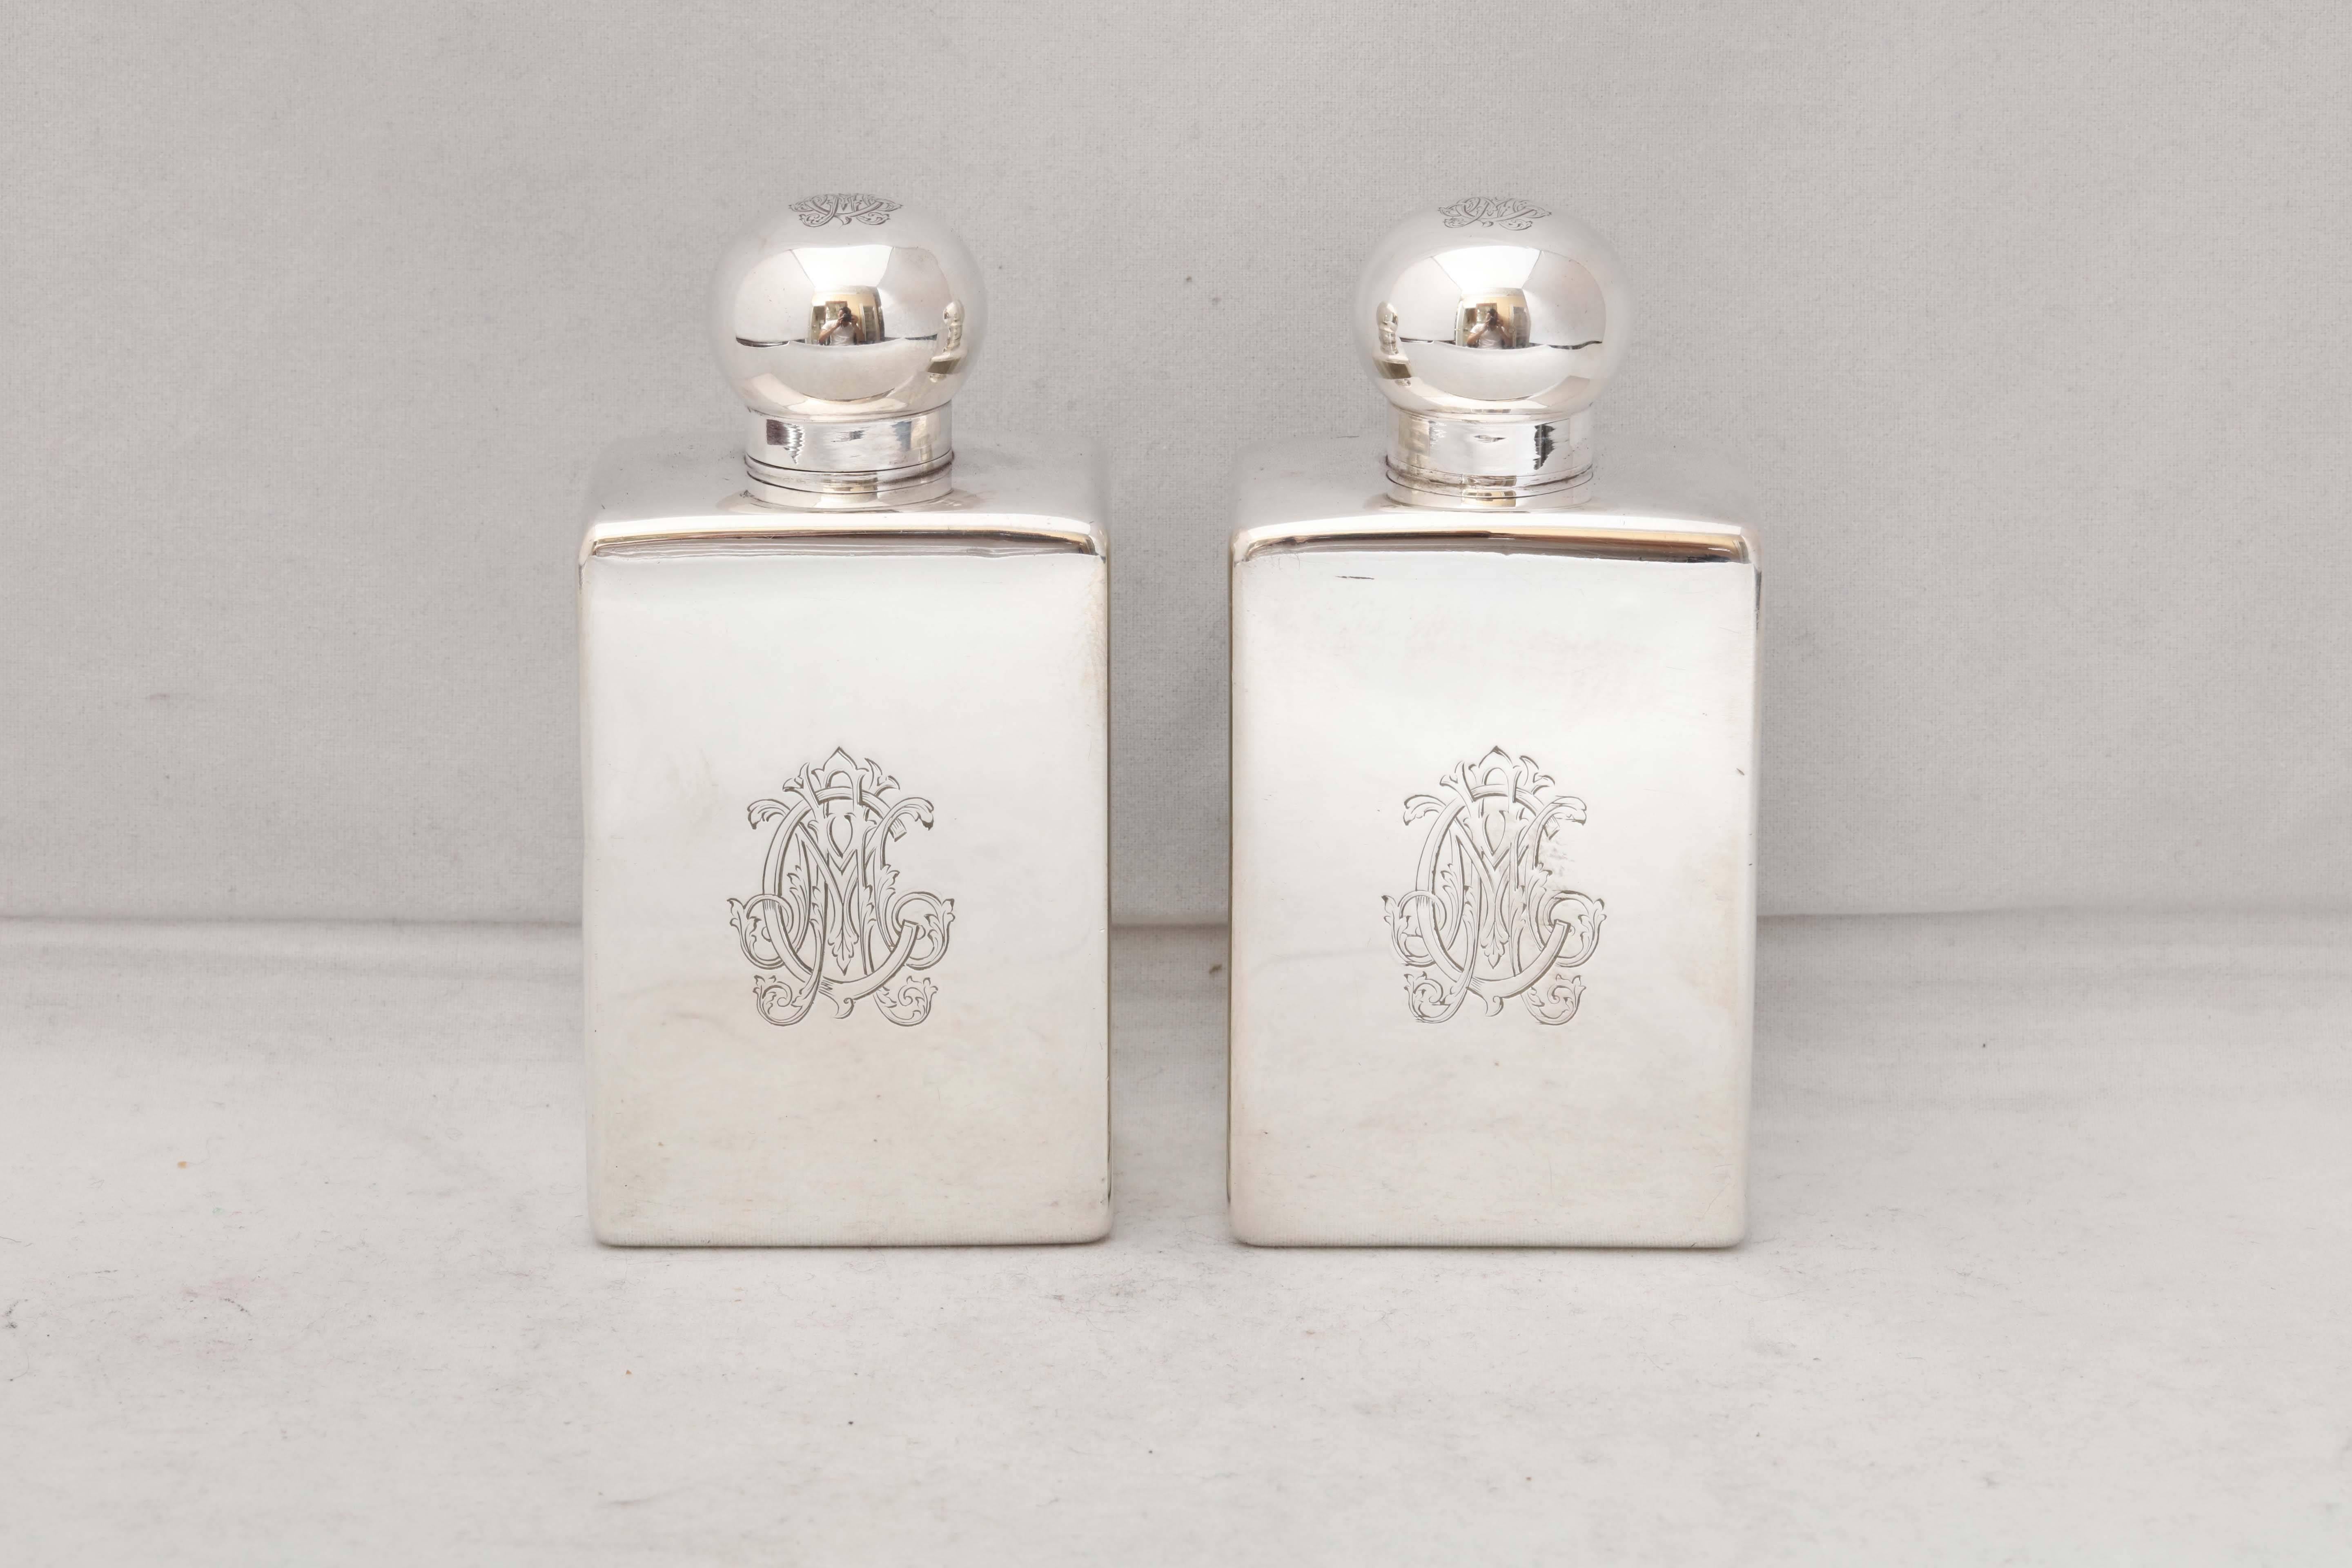 Pair of Edwardian, all sterling silver cologne bottles, Paris, circa 1910, Gustav Keller - maker. Sleek style; beautiful monogram (interlocking C & M) on front and on top of lid of each bottle. Lids unscrew. One bottle has a sterling silver stopper;